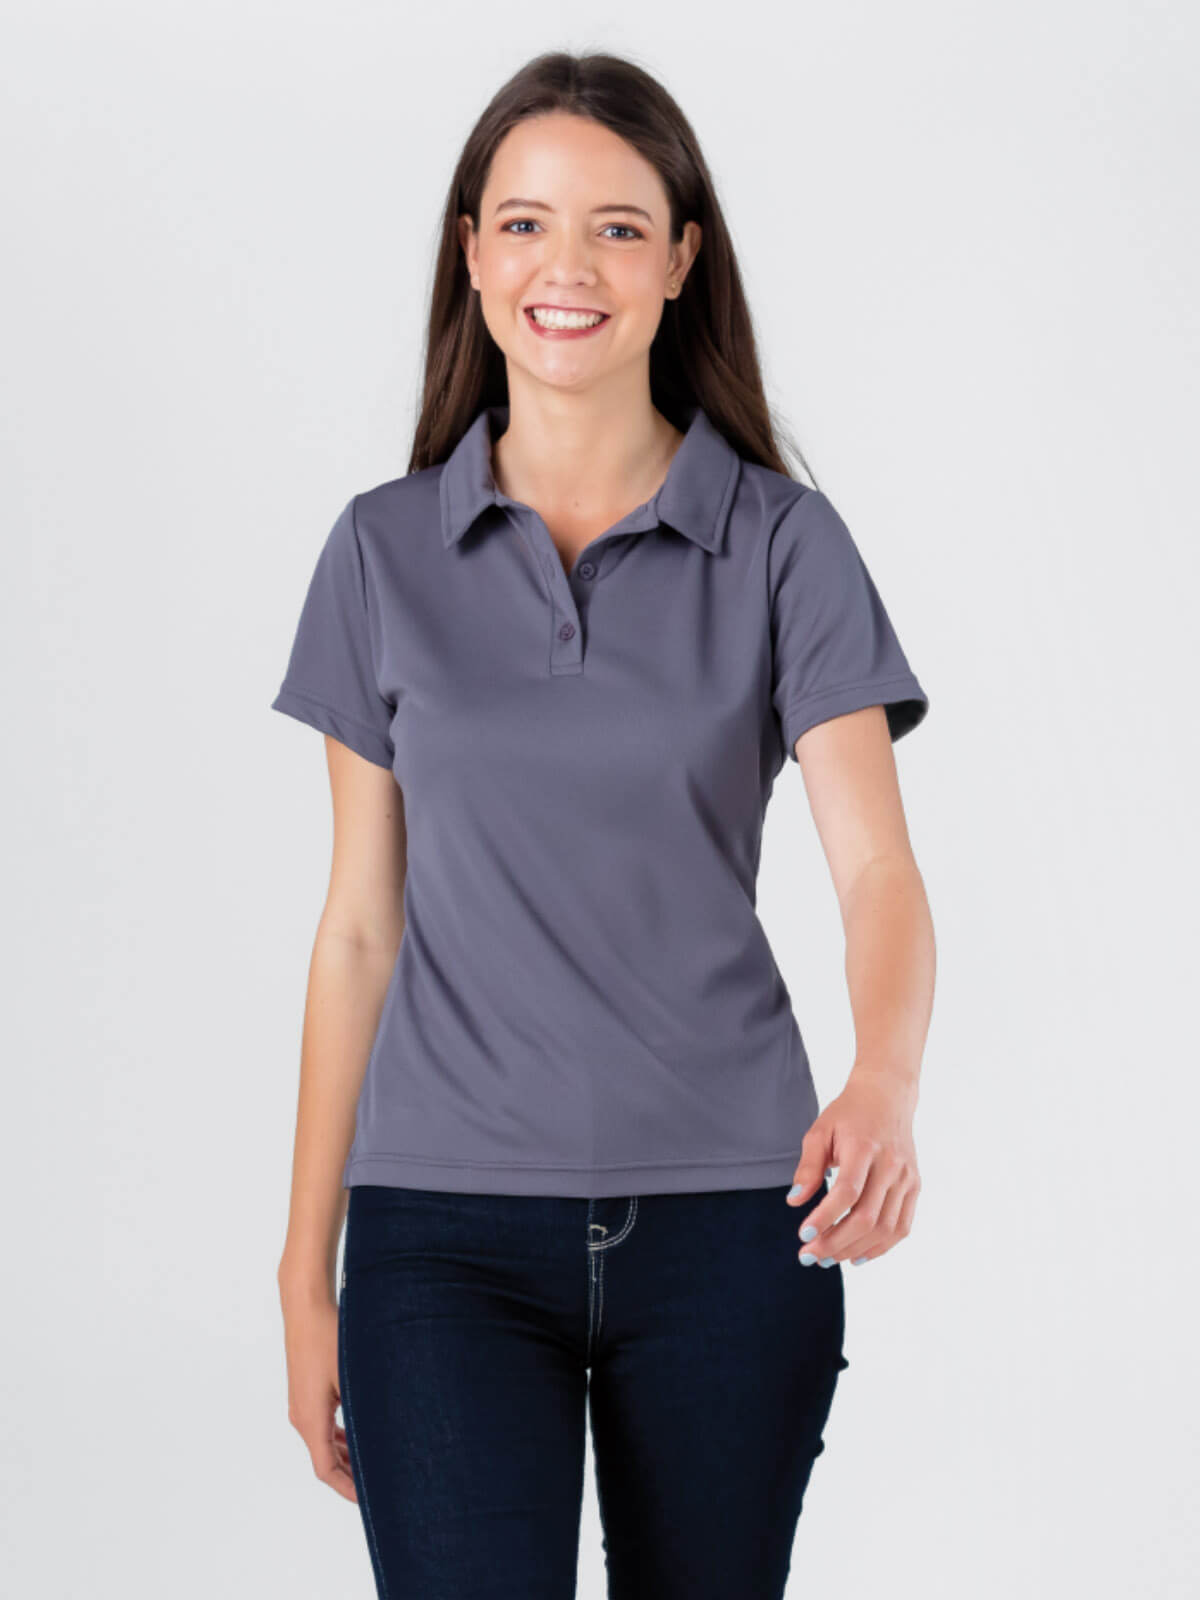 dry fit work polo women